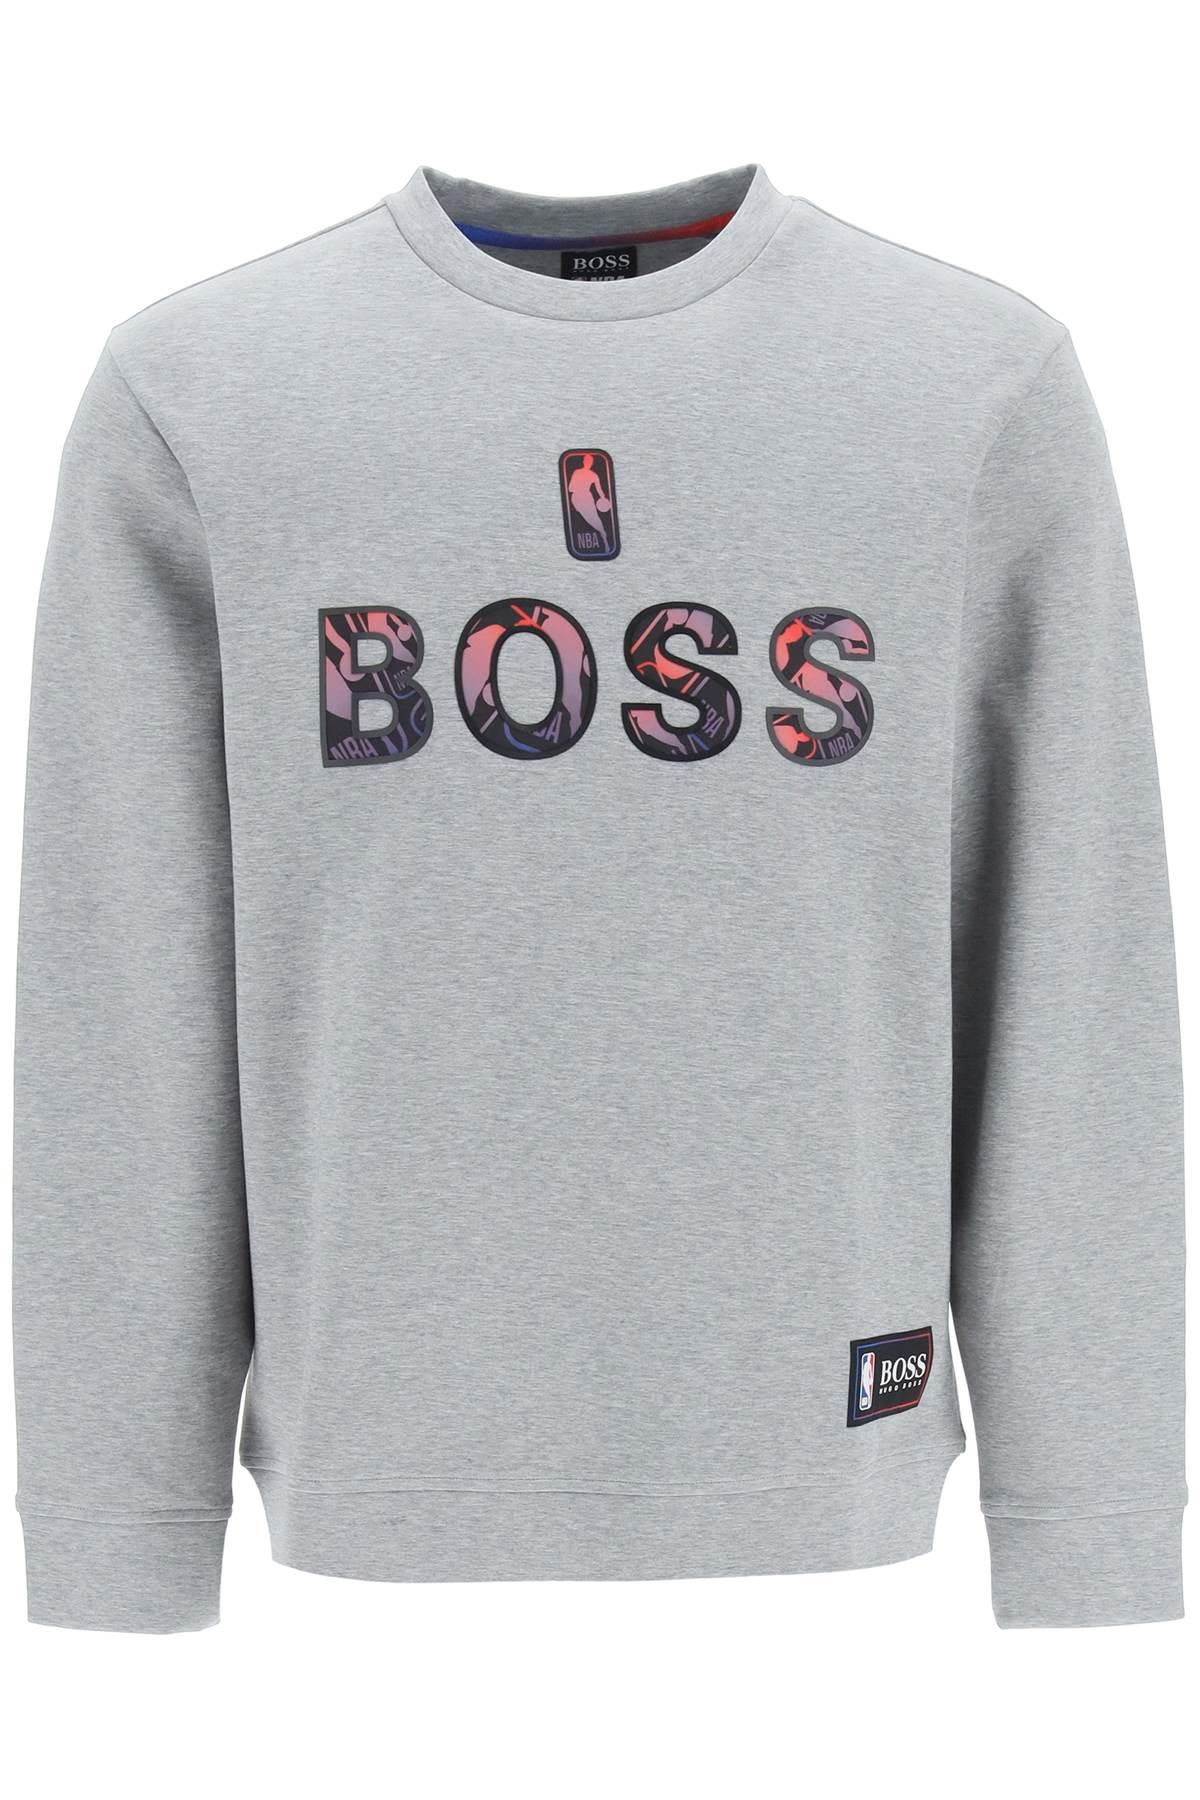 Mens Clothing Activewear gym and workout clothes Sweatshirts Grey Save 70% for Men DSquared² Cotton Logo Print Sweatshirt in Grey 